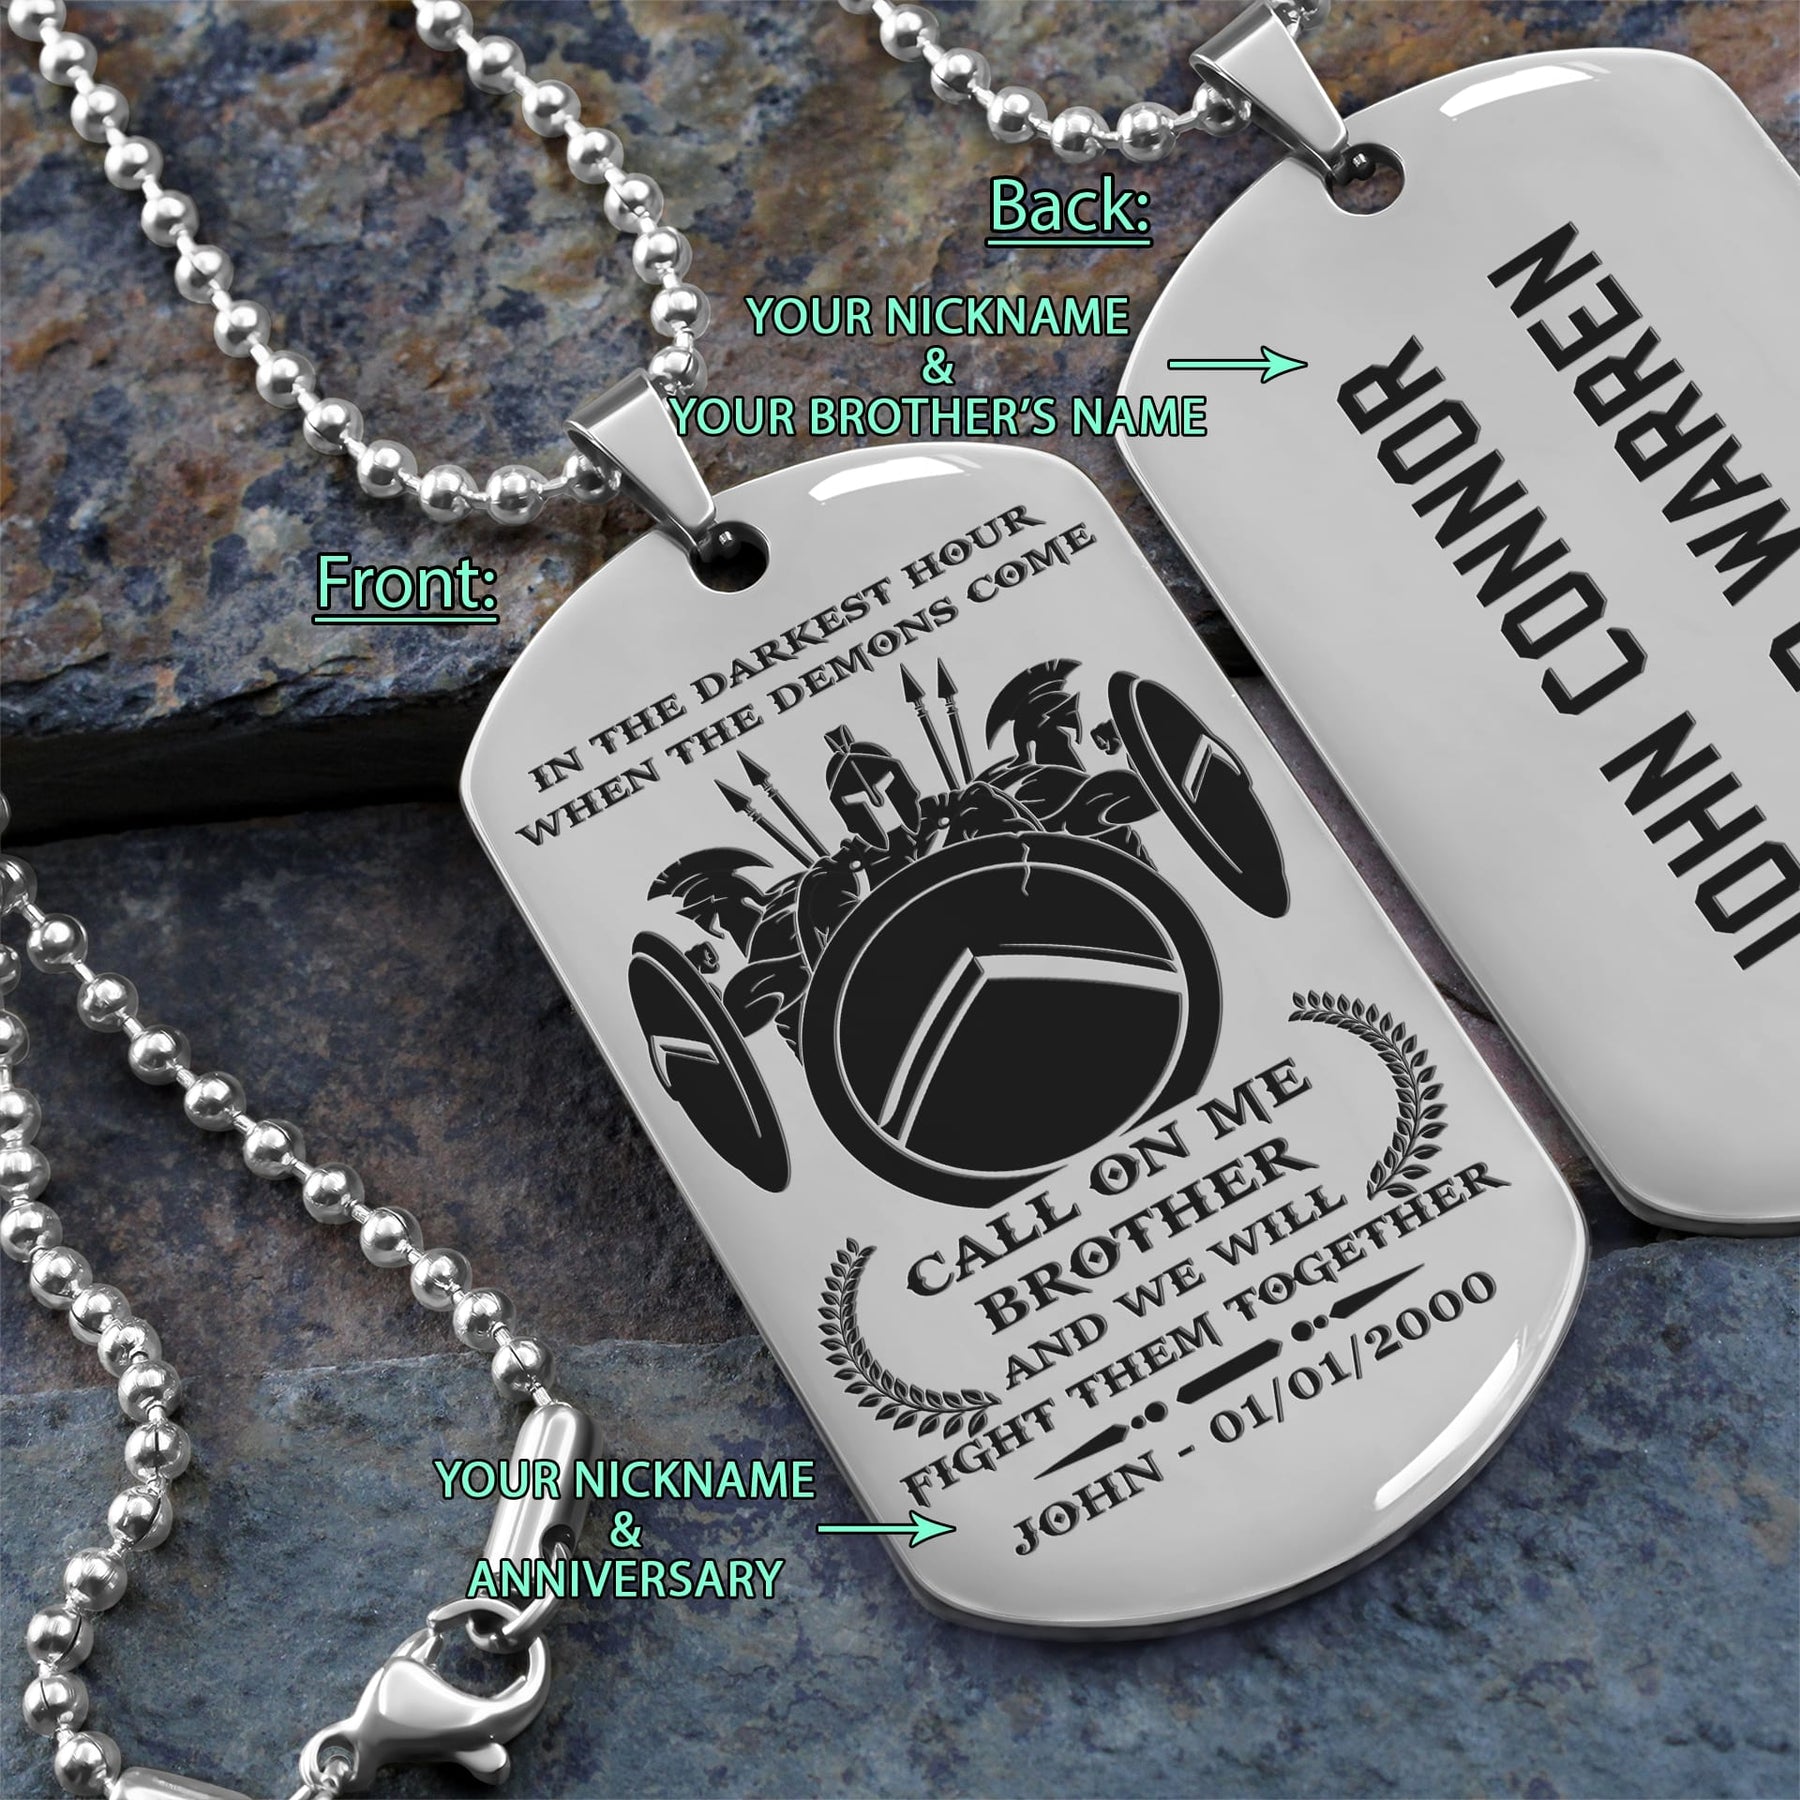 WAD026 - Call On Me Brother - English - Spartan - Warrior - Engrave Silver Dog Tag